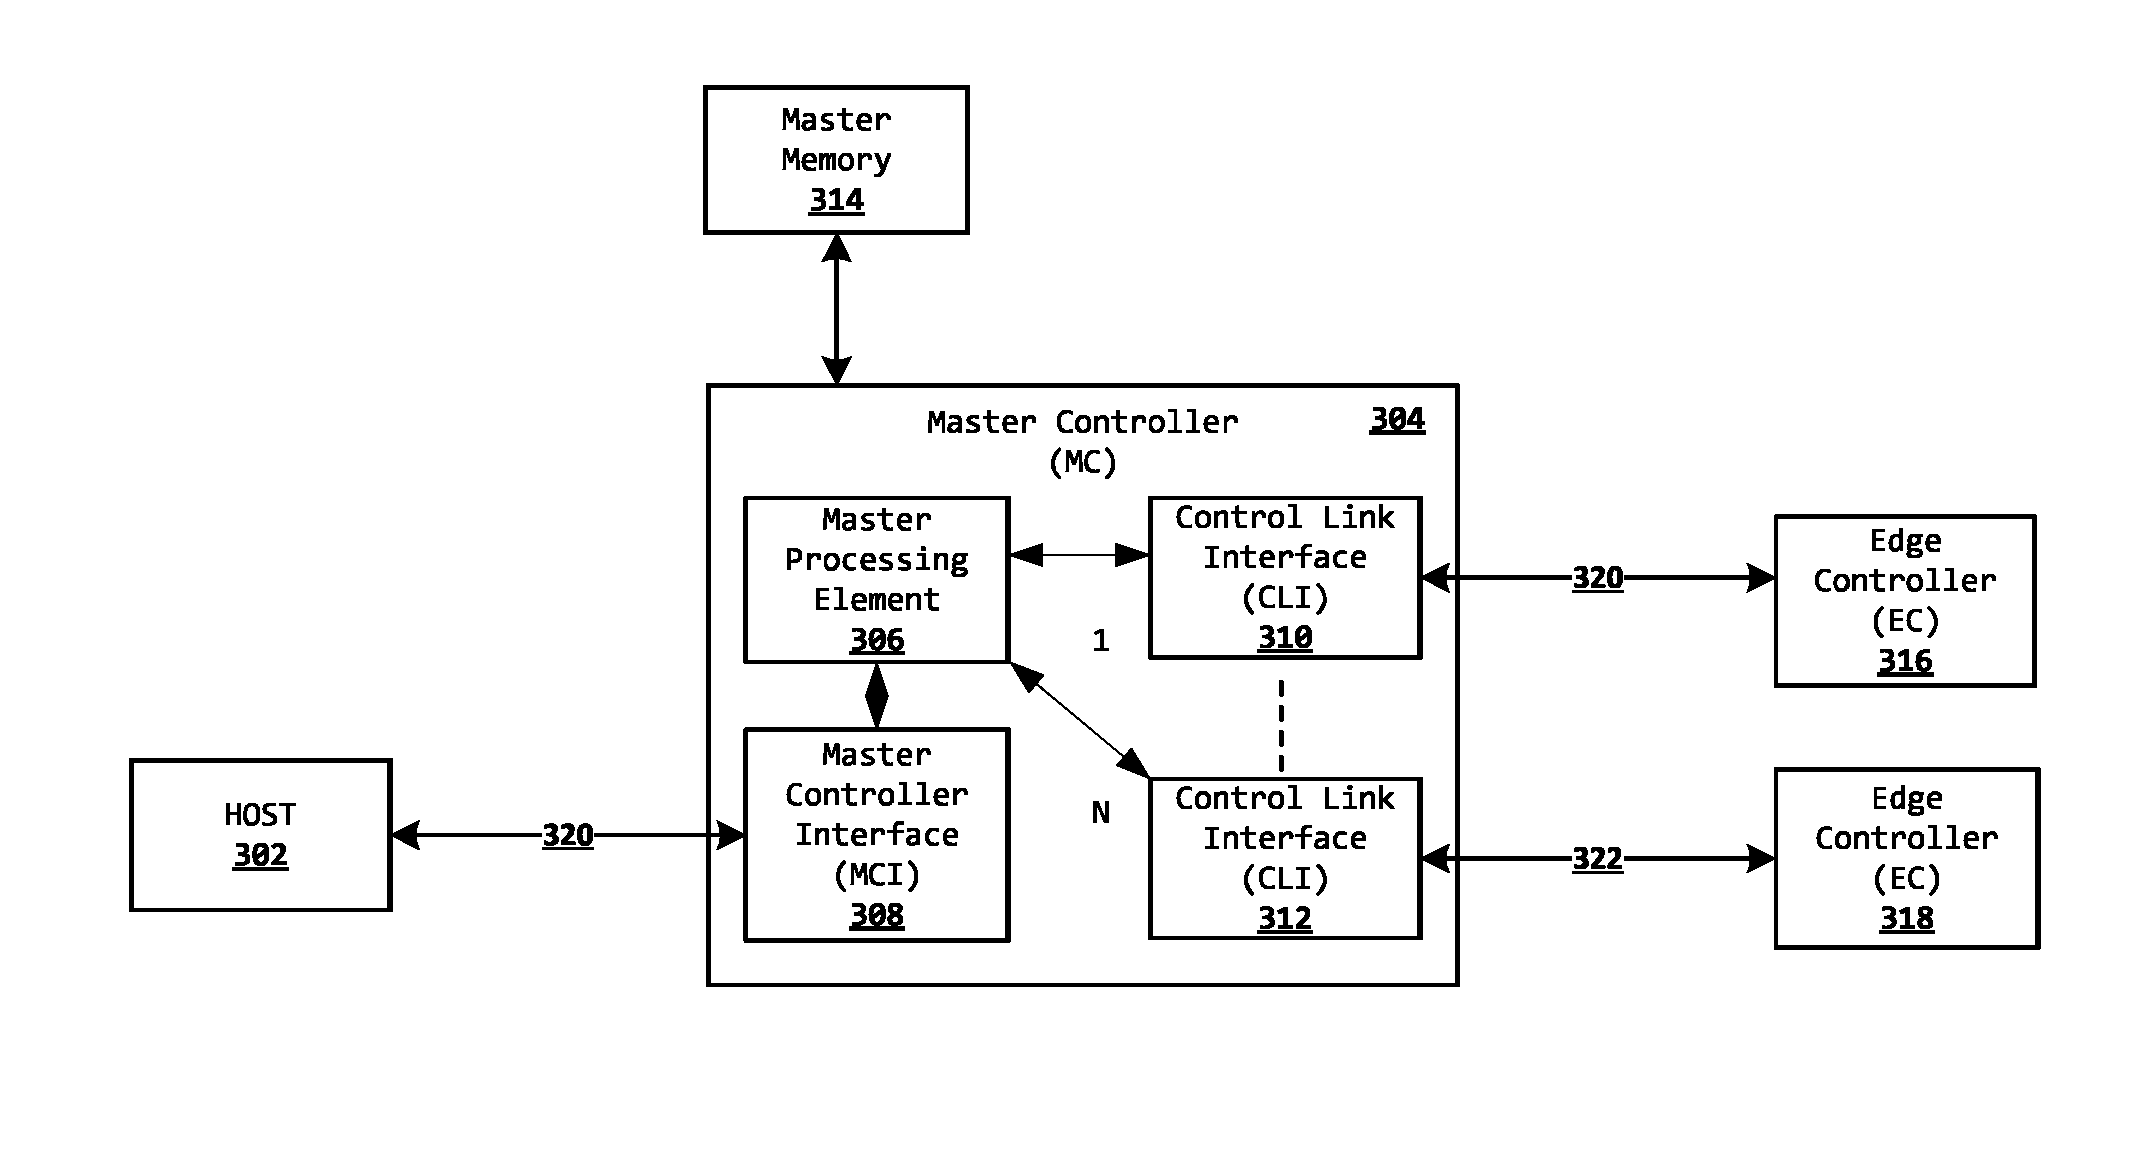 System and method for abstracting SATA and/or SAS storage media devices via a full duplex queued command interface to increase performance, lower host overhead, and simplify scaling storage media devices and systems